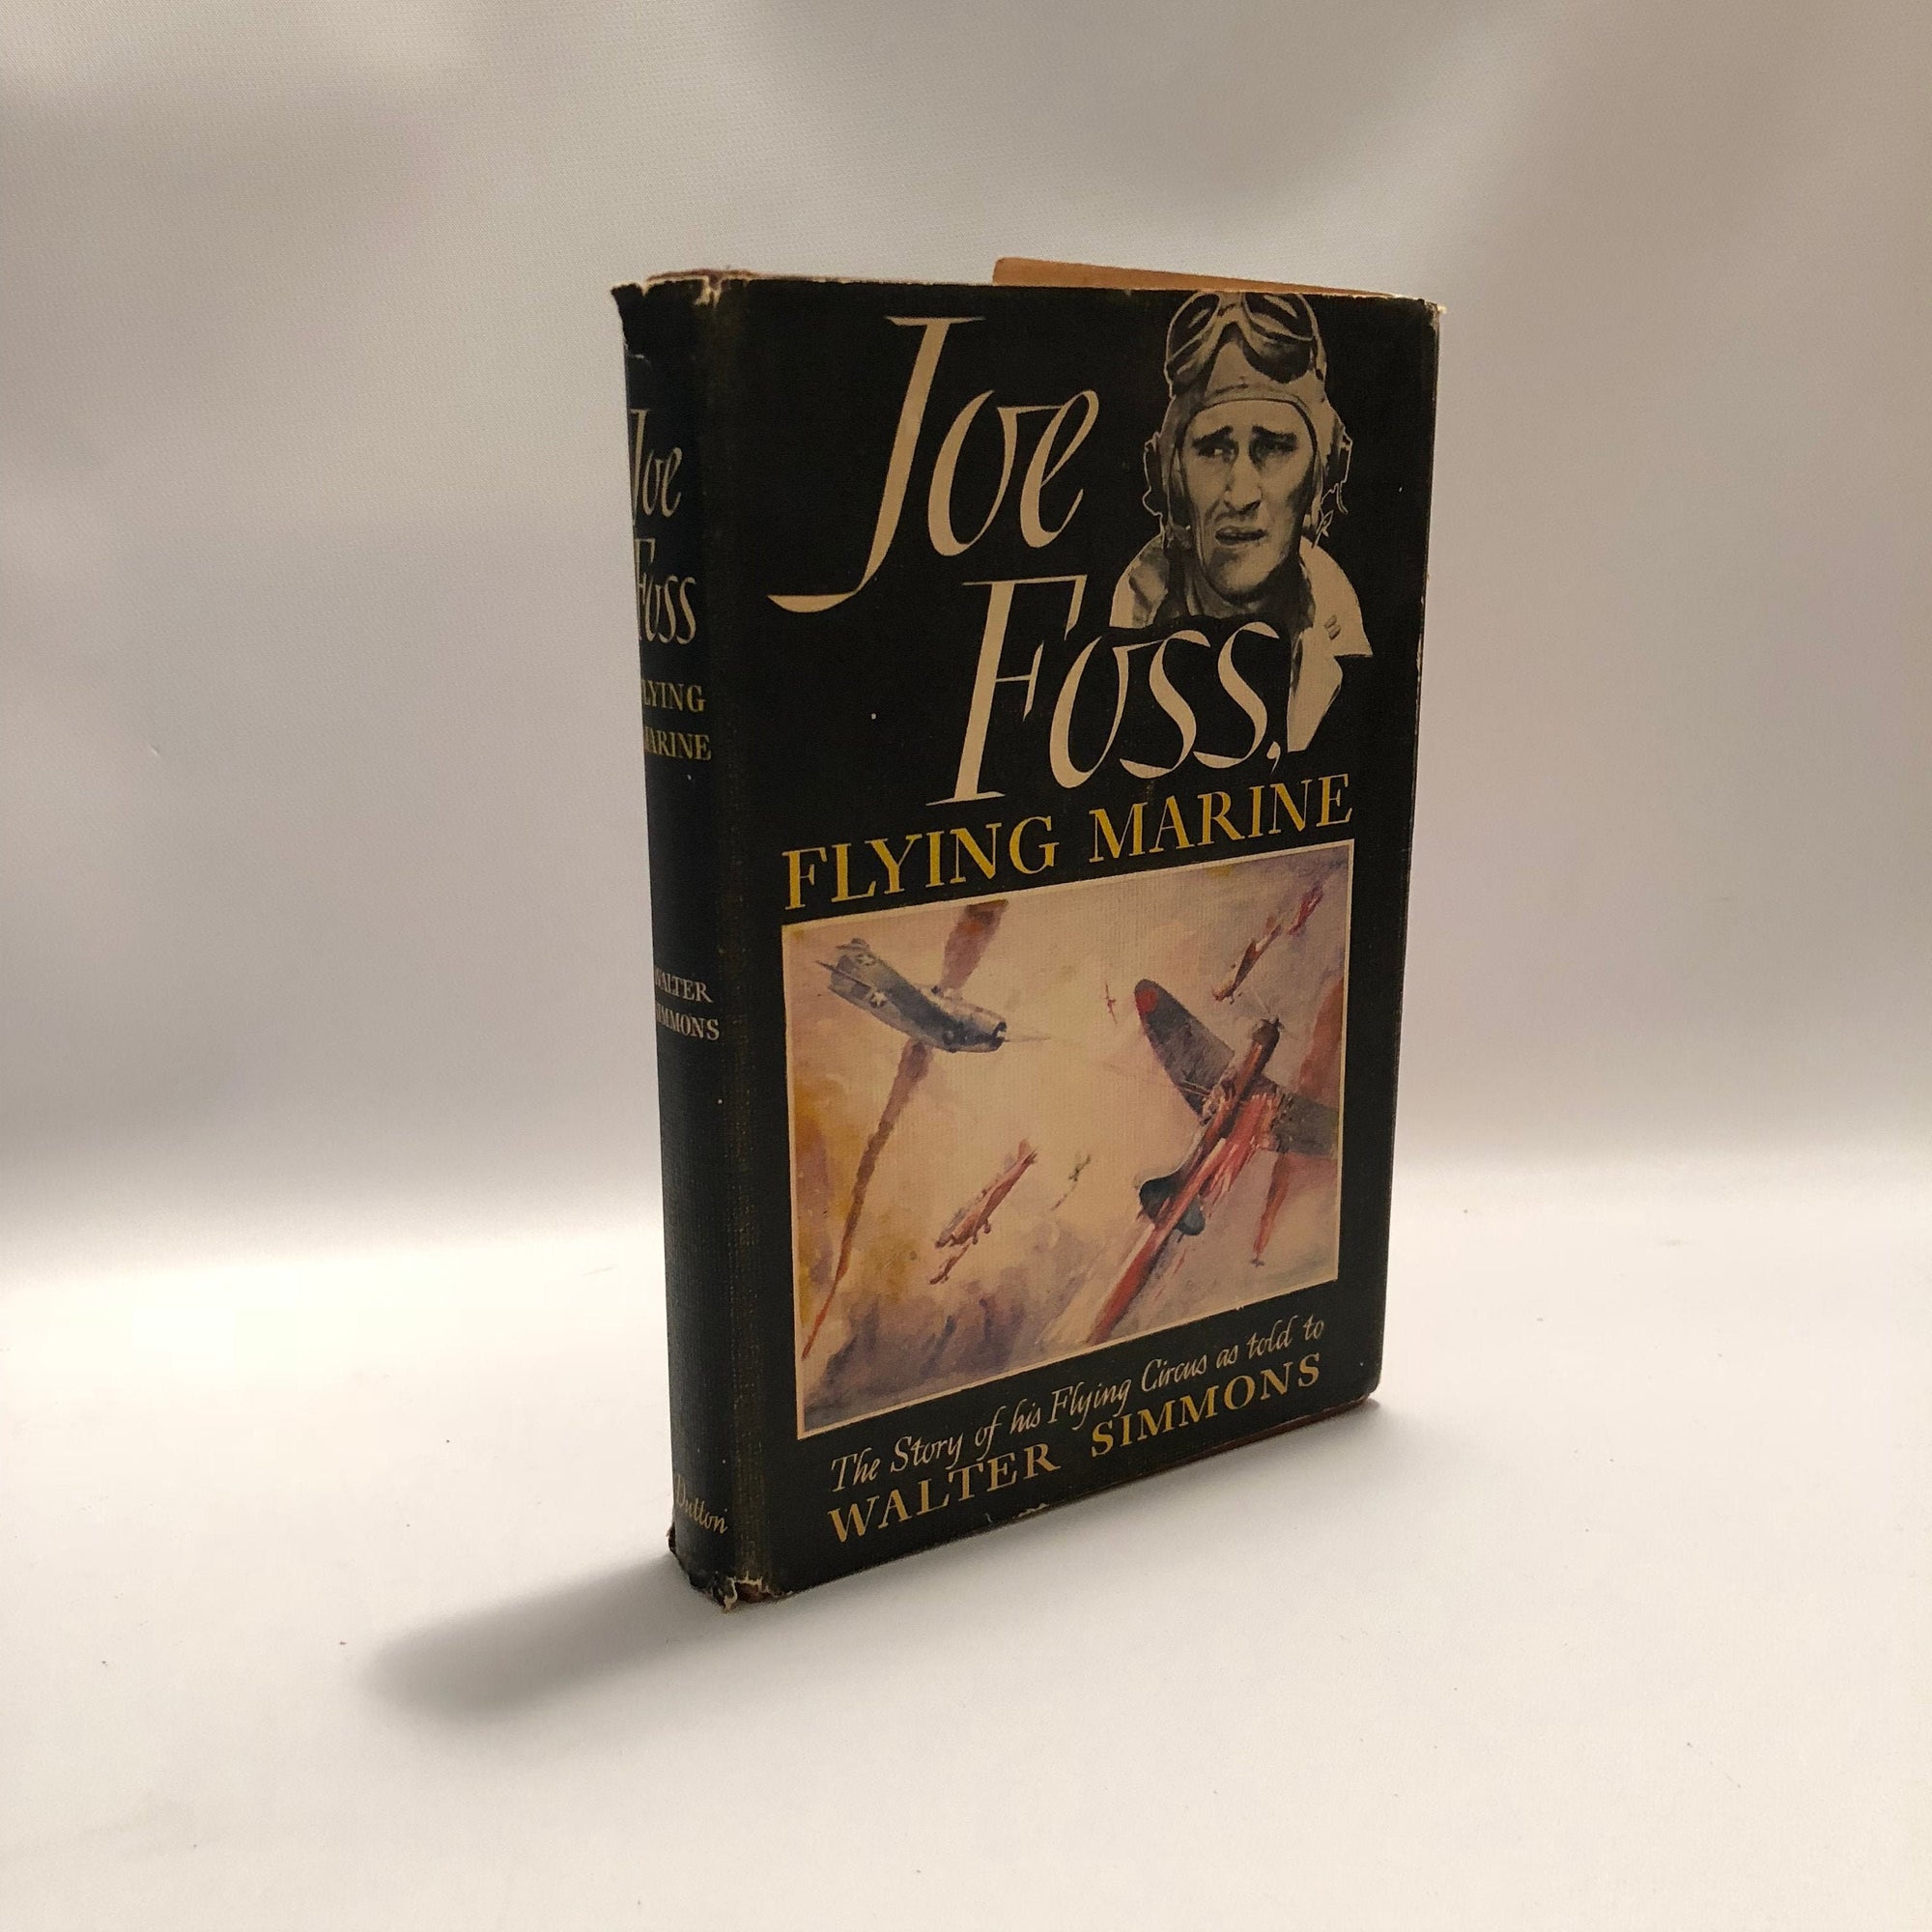 Joe Foss Flying Marine The Story of his Flying Circus as told to Walter Simmons 1943 First Edition Vintage Book Vintage Book